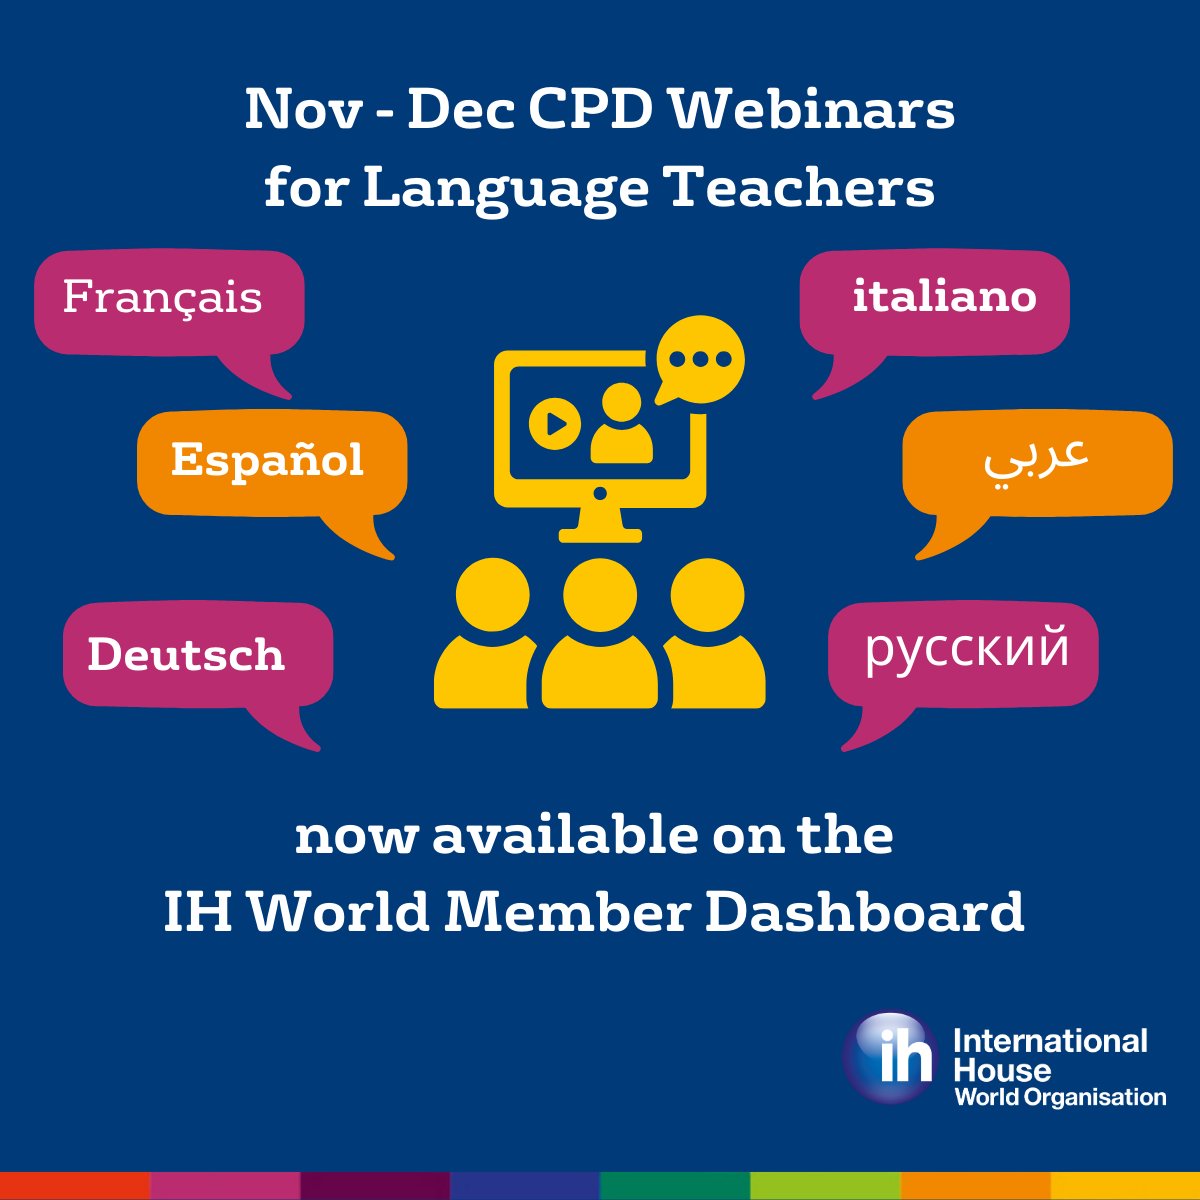 📣 Calling IH Language teachers! Don’t miss out on the recordings of our free CPD webinars 💻 for teachers of French, Spanish, Italian, German and Russian 📣

Find them on the IH World portal here 👉 ihworld.com/member-dashboa… 

#LanguageTeaching #CPD #IHCPD